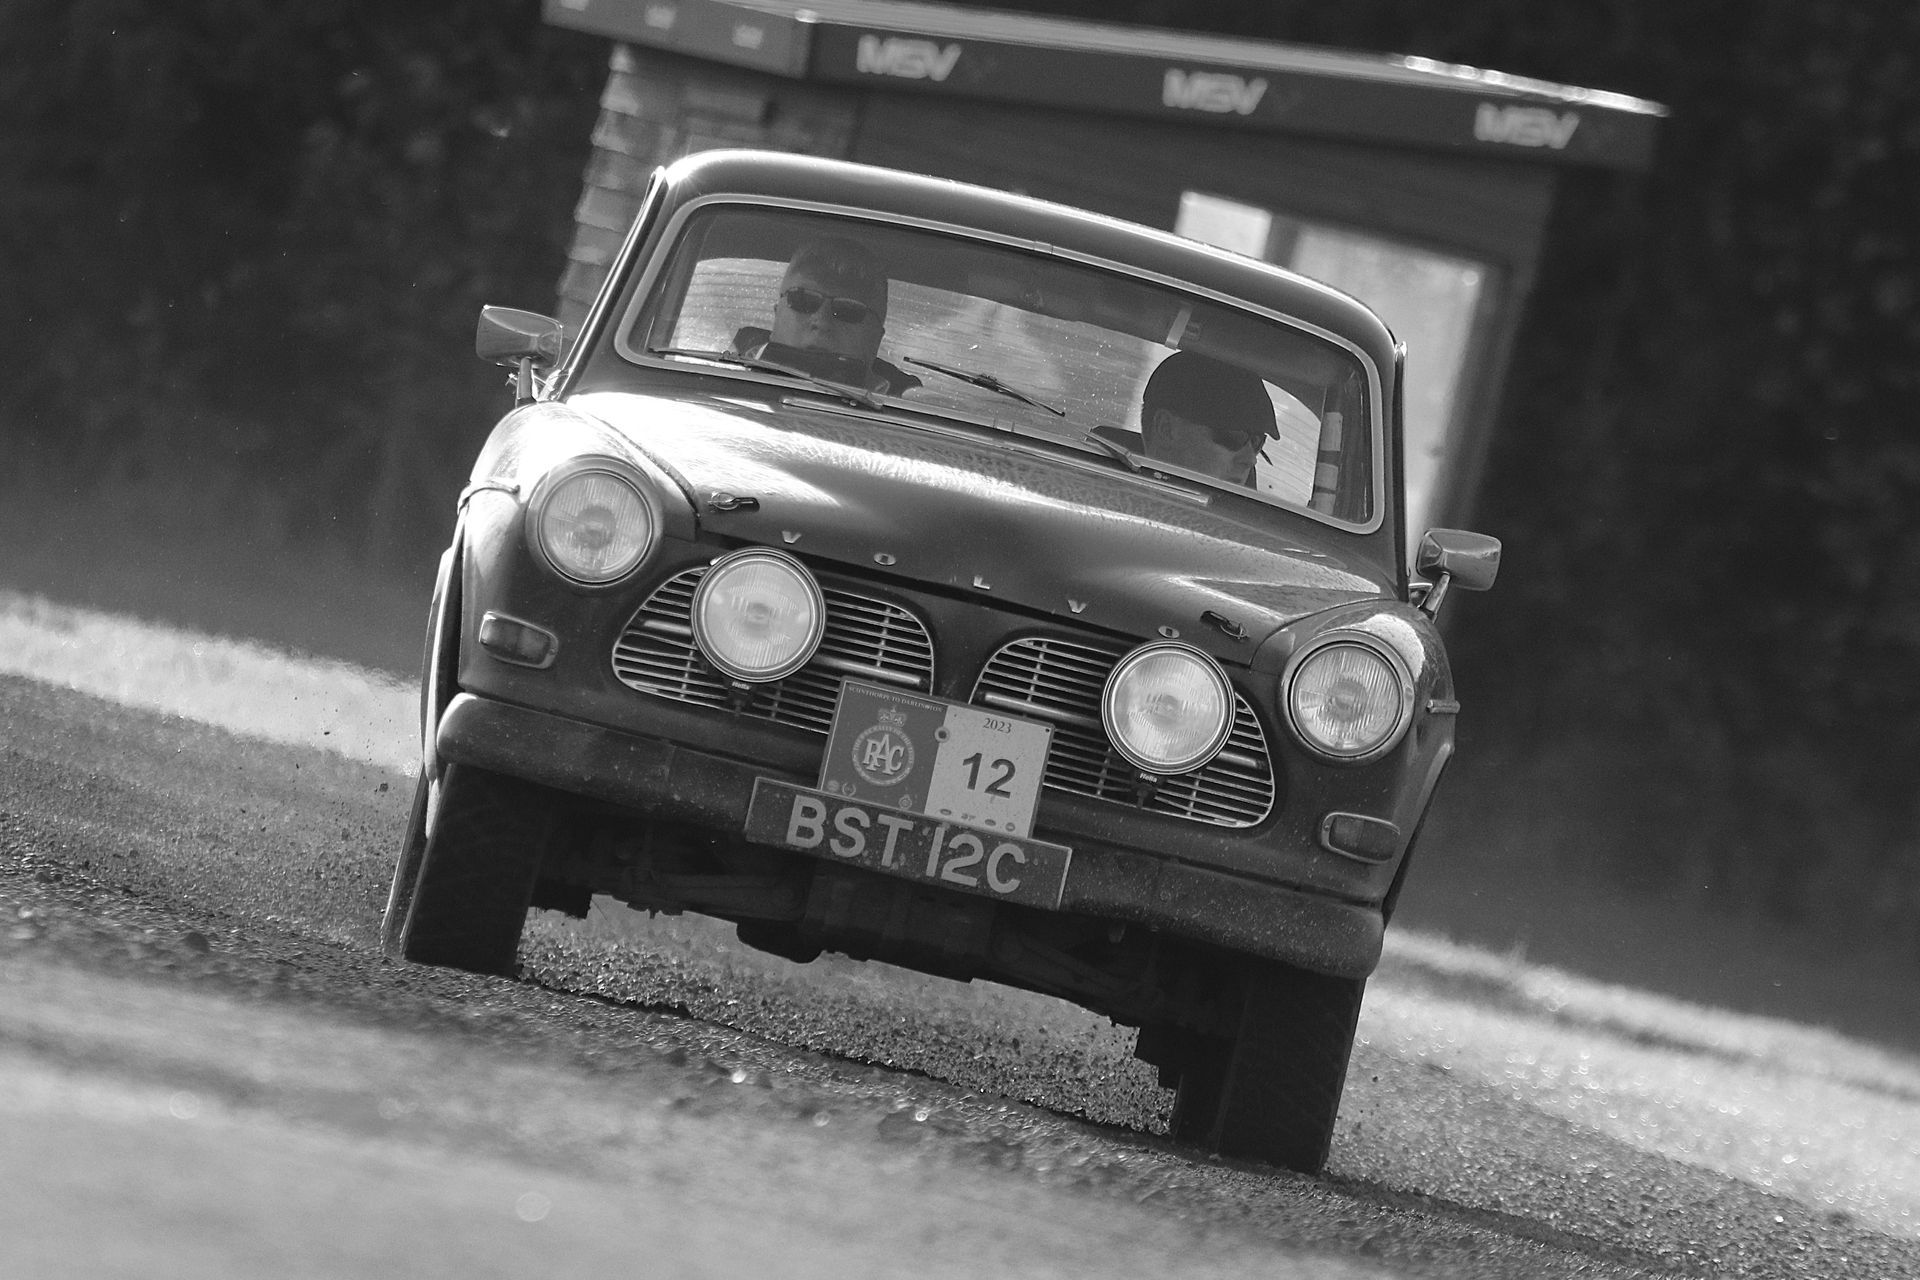 Volvo classic rally car competing in the RAC Rally of the Tests